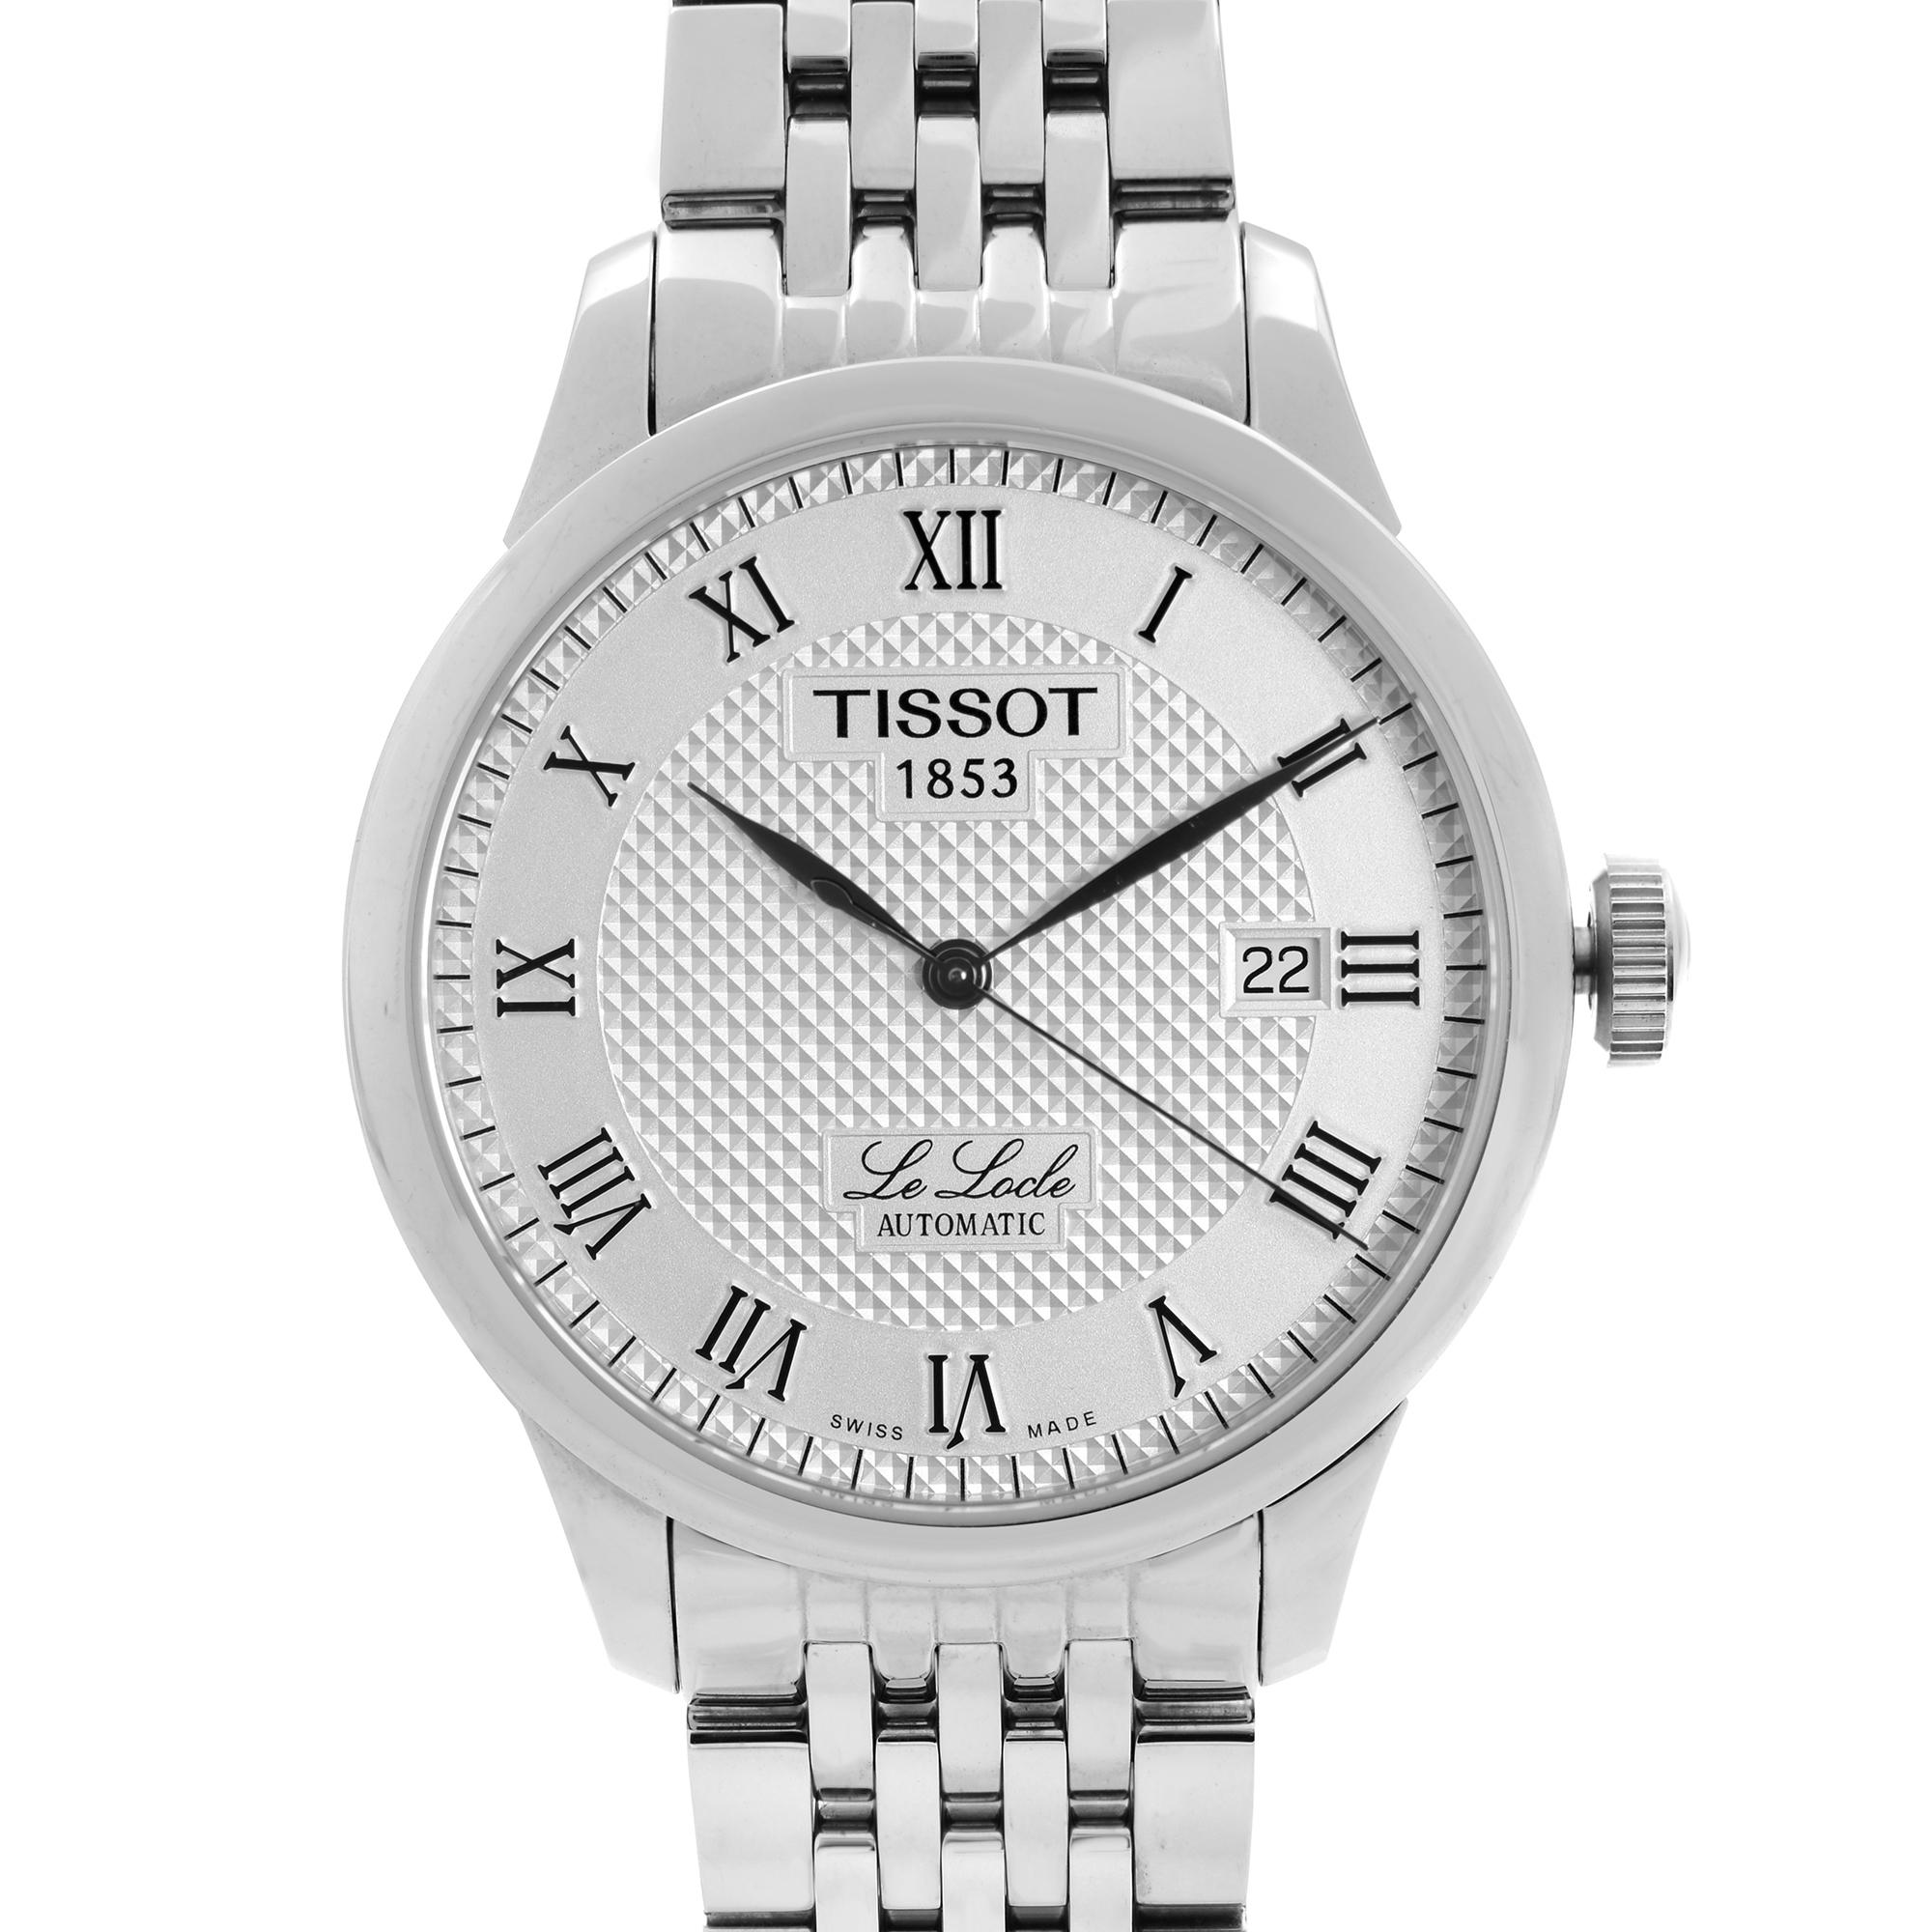 Display Model Tissot T-Classic Le Loche Stainless Steel Silver Hobnail Dial Men's Automatic Watch T41148333. This Beautiful Timepiece Features: Stainless Steel Case with a  Stainless Steel Bracelet. Fixed Steel Bezel. Silver Guilloche Dial with